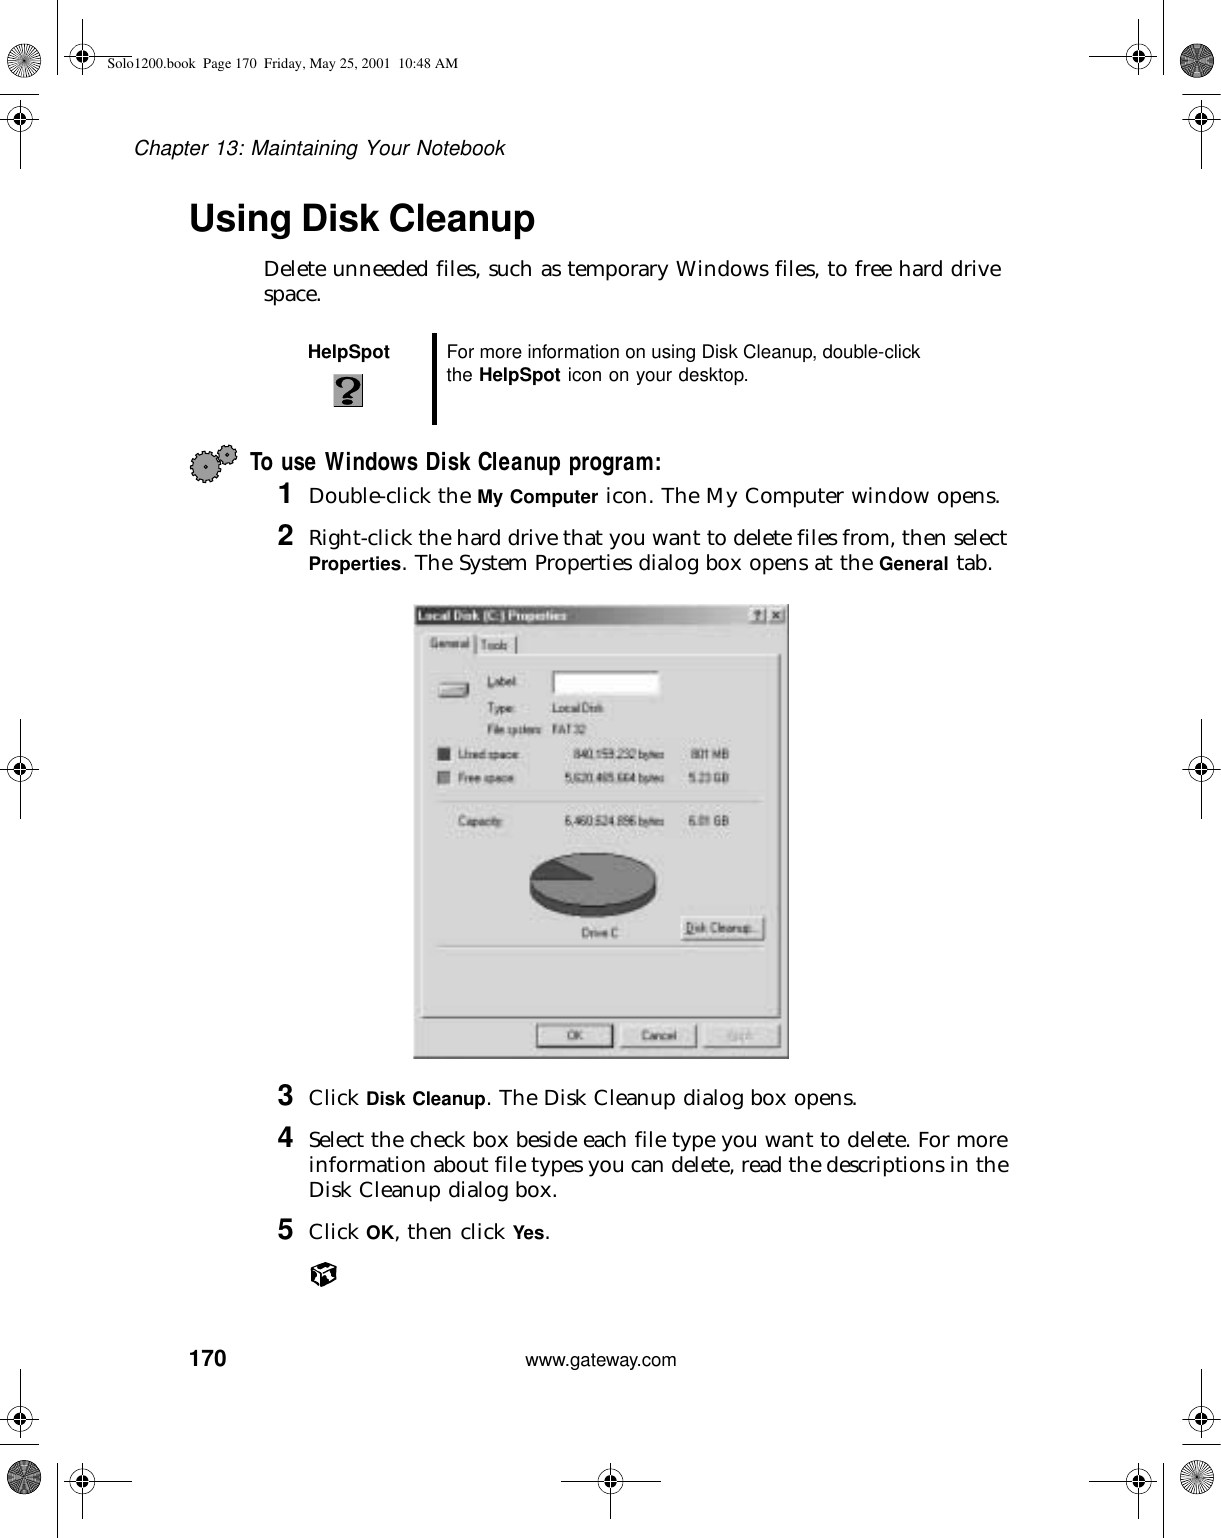 170Chapter 13: Maintaining Your Notebookwww.gateway.comUsing Disk CleanupDelete unneeded files, such as temporary Windows files, to free hard drive space.To use Windows Disk Cleanup program:1Double-click the My Computer icon. The My Computer window opens.2Right-click the hard drive that you want to delete files from, then select Properties. The System Properties dialog box opens at the General tab.3Click Disk Cleanup. The Disk Cleanup dialog box opens.4Select the check box beside each file type you want to delete. For more information about file types you can delete, read the descriptions in the Disk Cleanup dialog box.5Click OK, then click Yes.HelpSpot For more information on using Disk Cleanup, double-click the HelpSpot icon on your desktop.Solo1200.book Page 170 Friday, May 25, 2001 10:48 AM